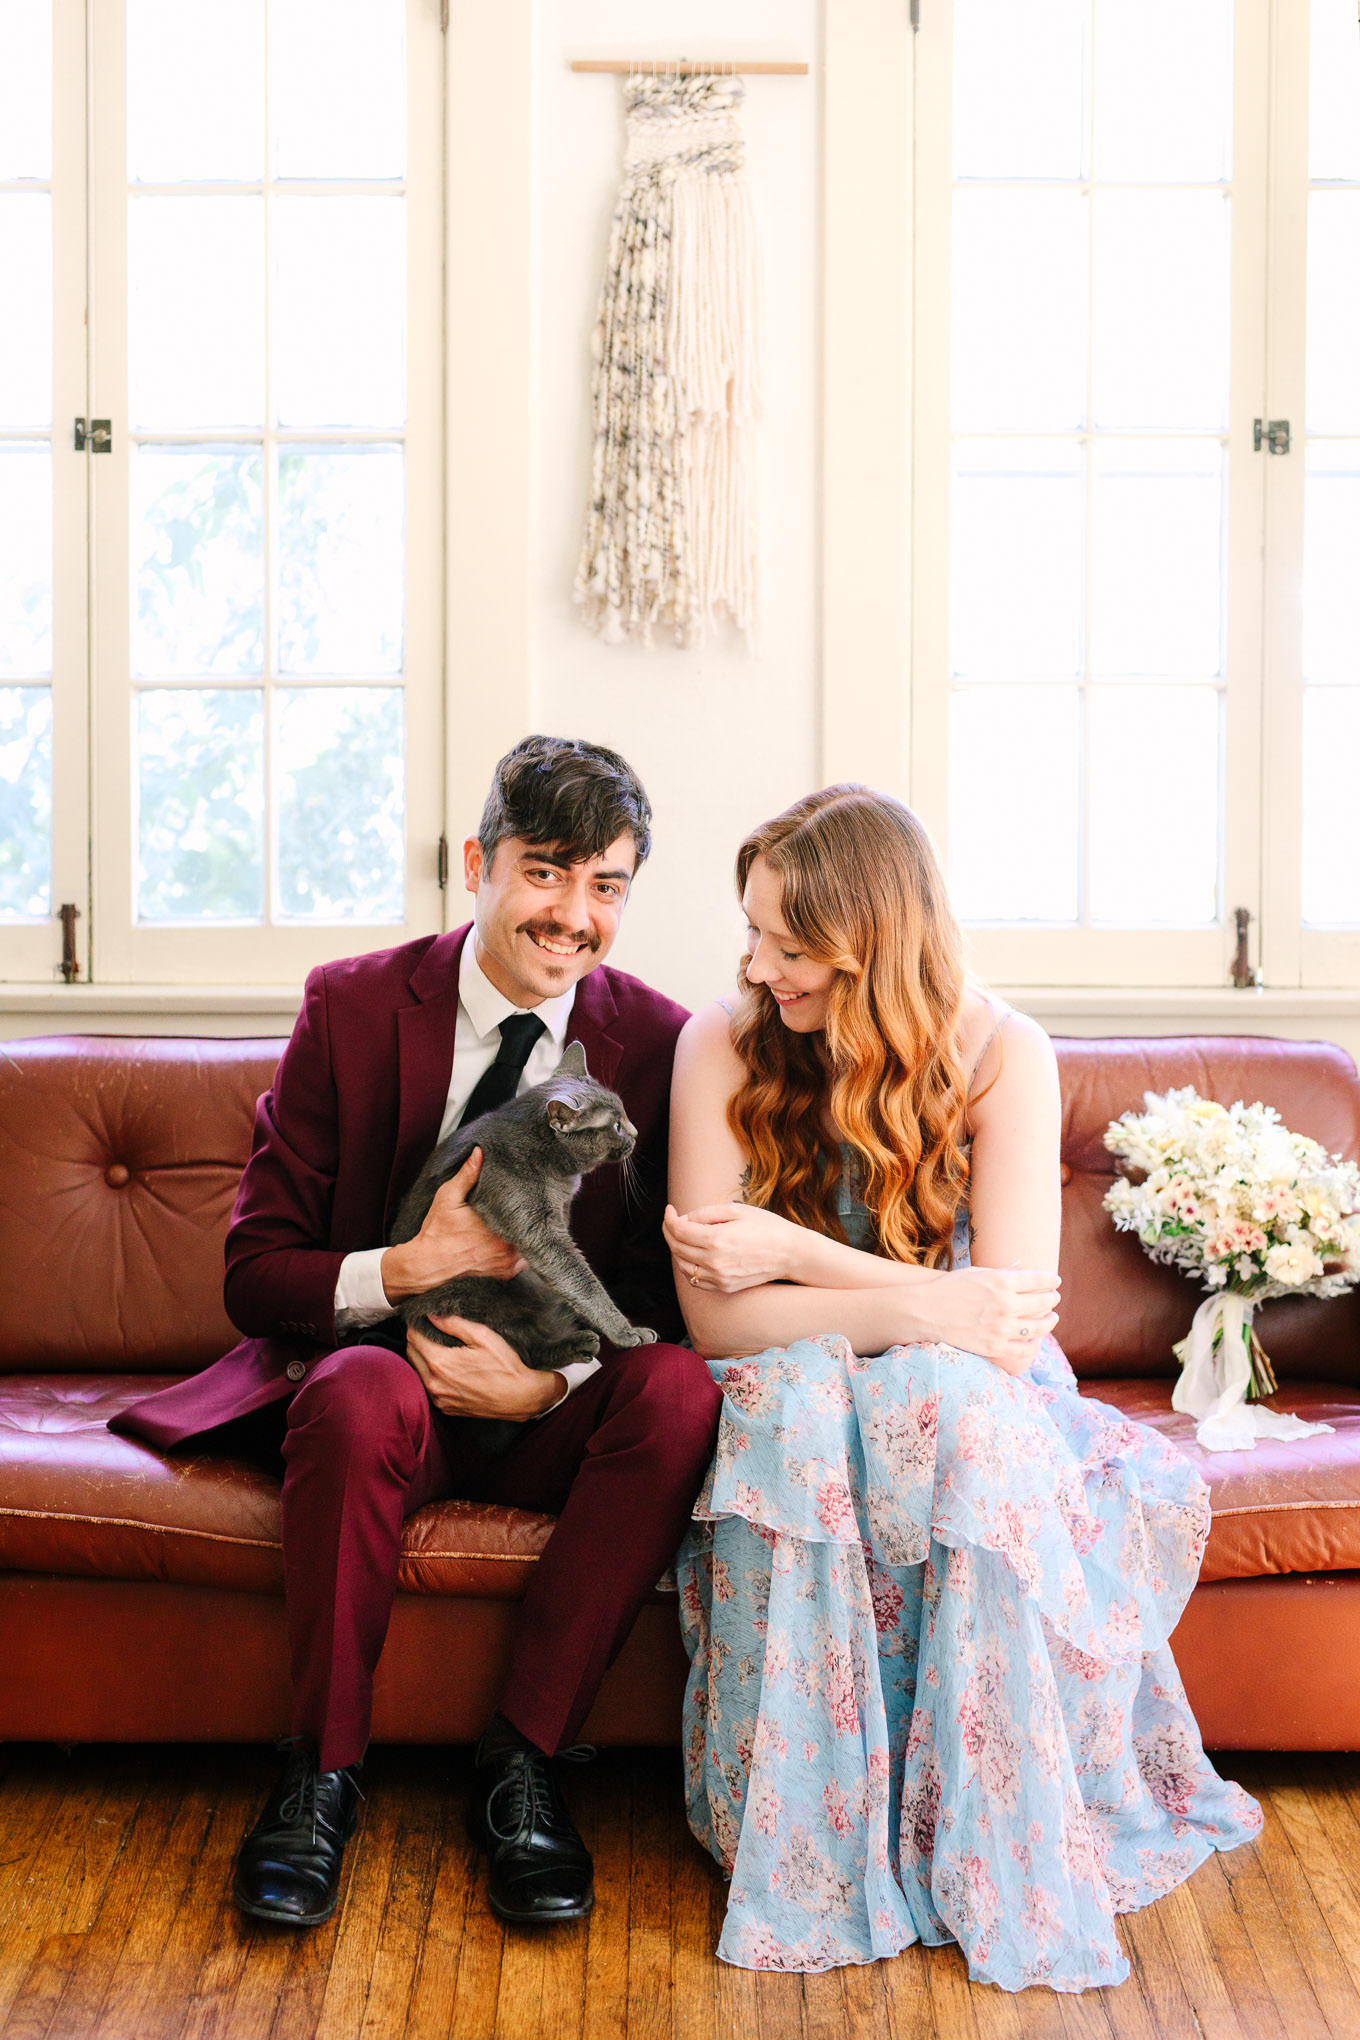 Couple with their gray cat on the couch | Los Angeles Arboretum Elopement | Colorful and elevated wedding photography for fun-loving couples in Southern California | #LosAngelesElopement #elopement #LAarboretum #LAskyline #elopementphotos   Source: Mary Costa Photography | Los Angeles